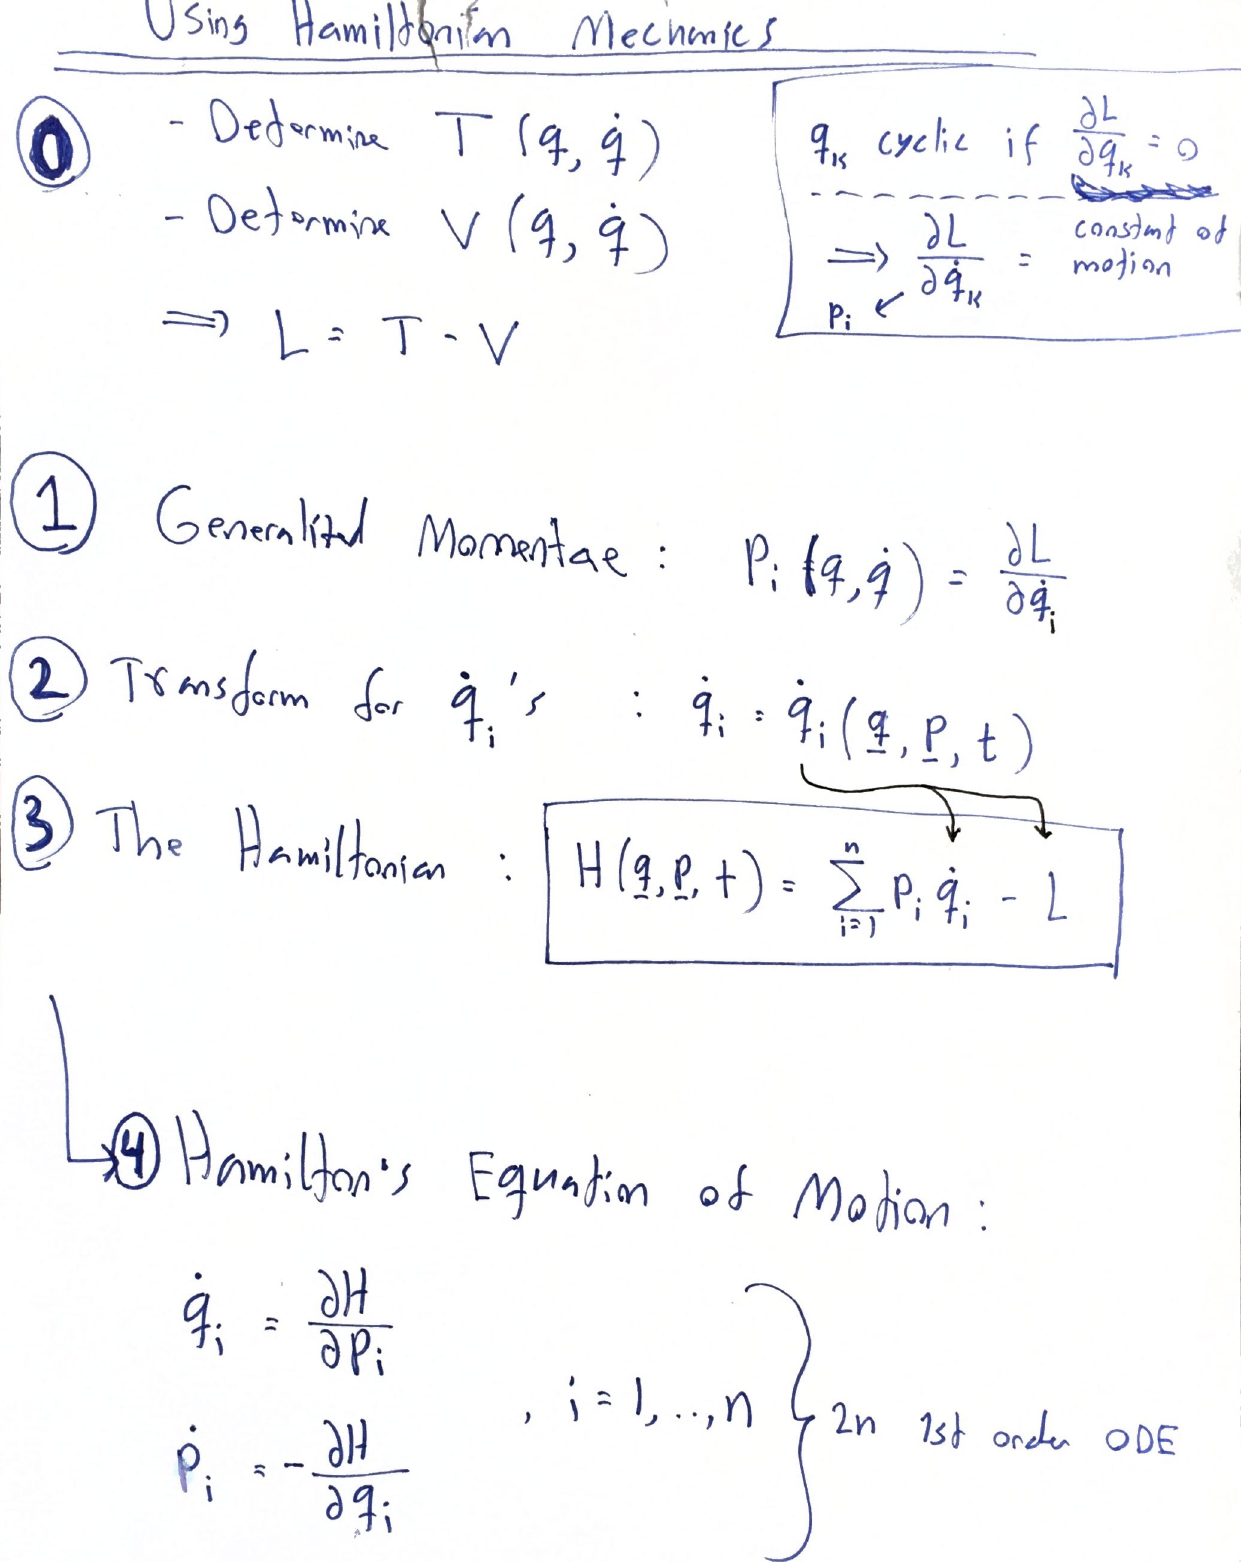 Page 1 of 4 - Using Hamiltonian Mechanics Guide And 3 Simple Examples